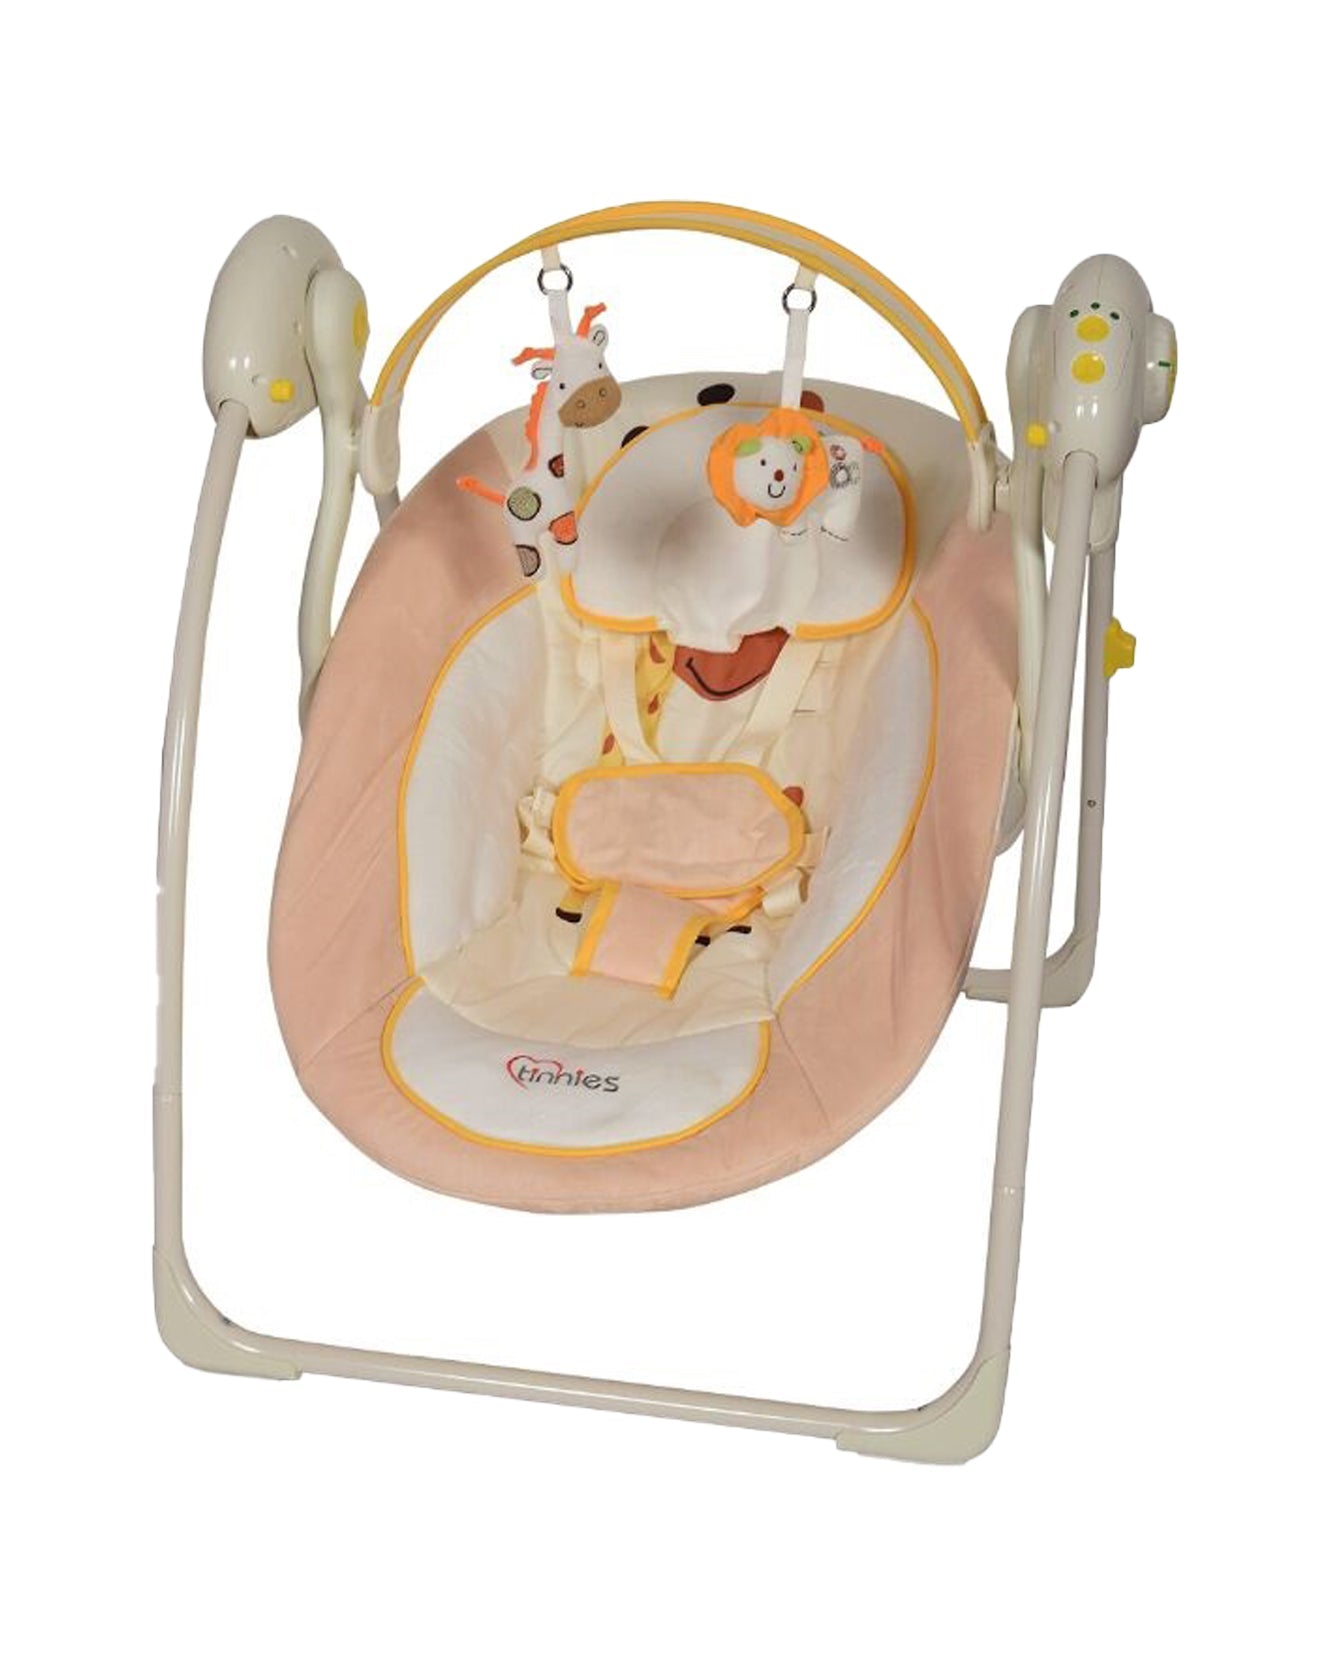 Tinnies Baby Electric Swing (Multi Color)